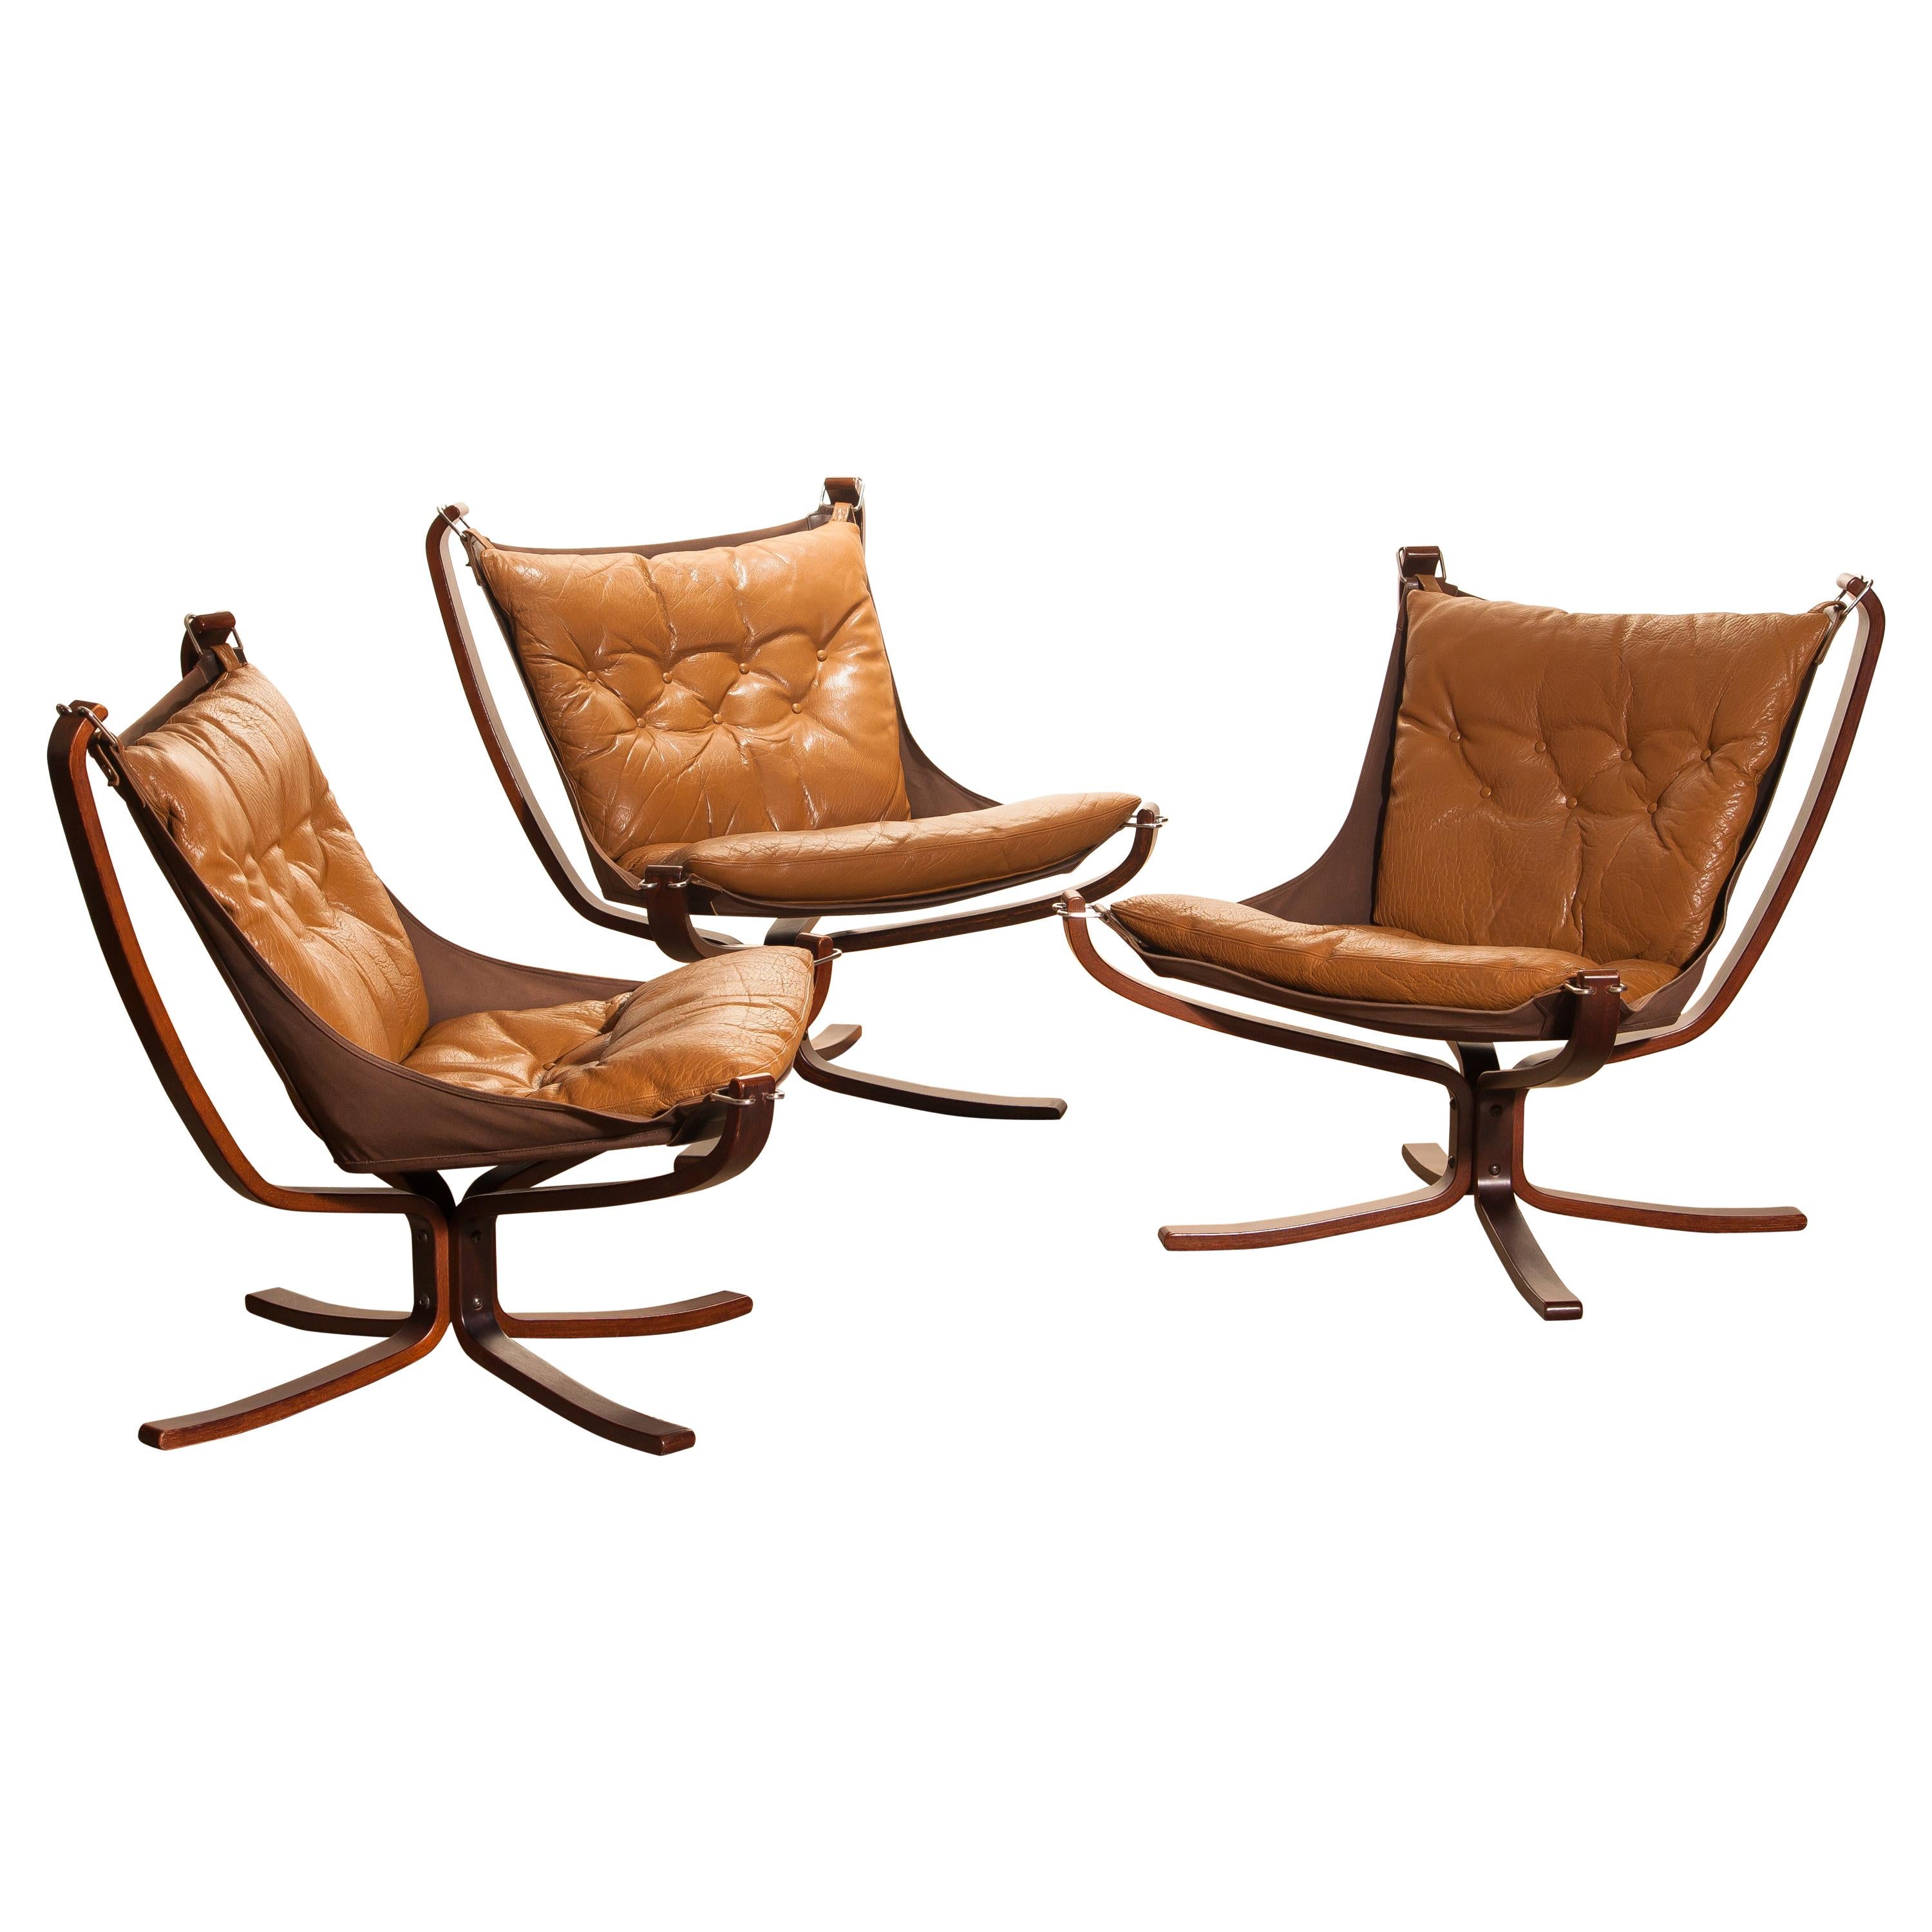 1970s, Set of Three Camel Leather 'Falcon' Lounge Chairs by Sigurd Ressell